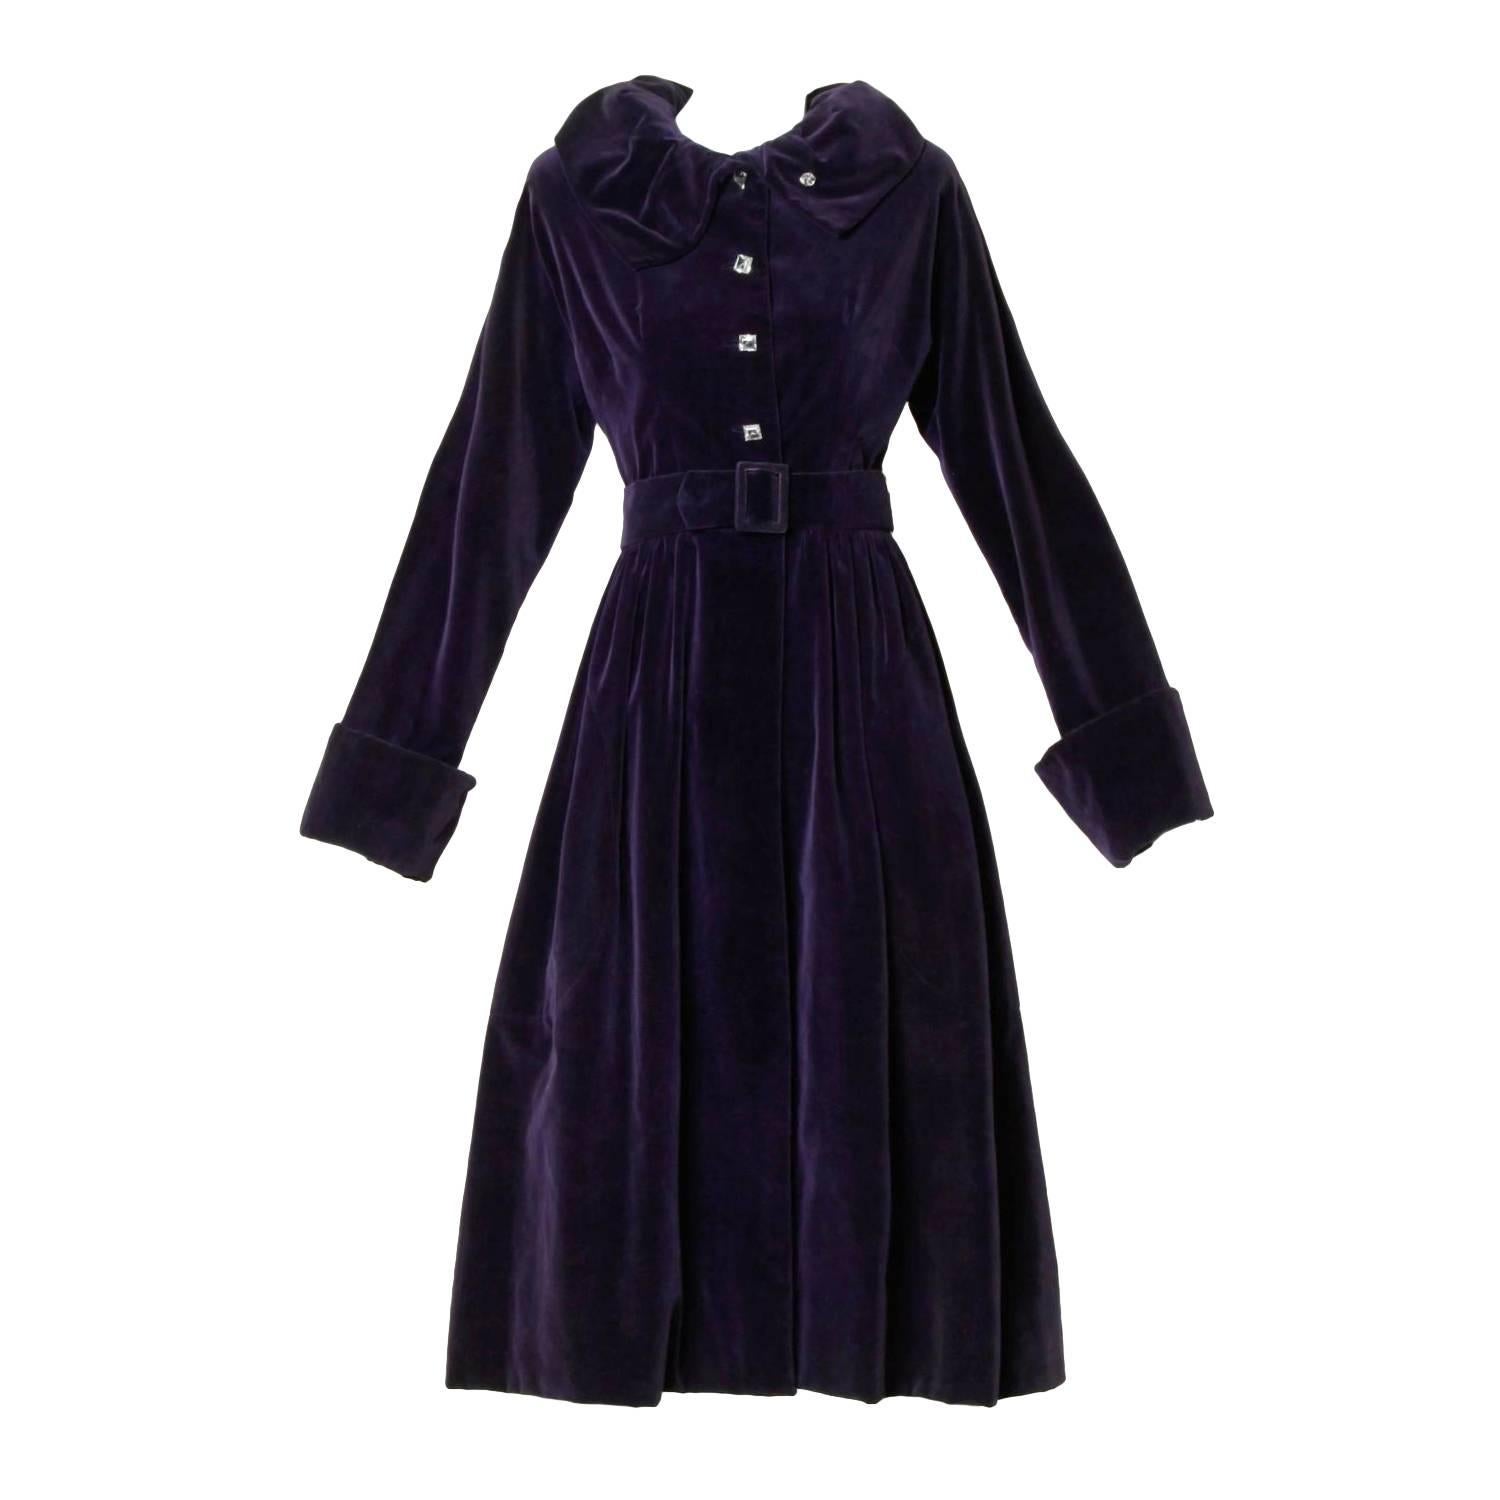 Gorgeous 1940s Vintage Purple Velvet Coat with Glass Buttons + Matching Belt